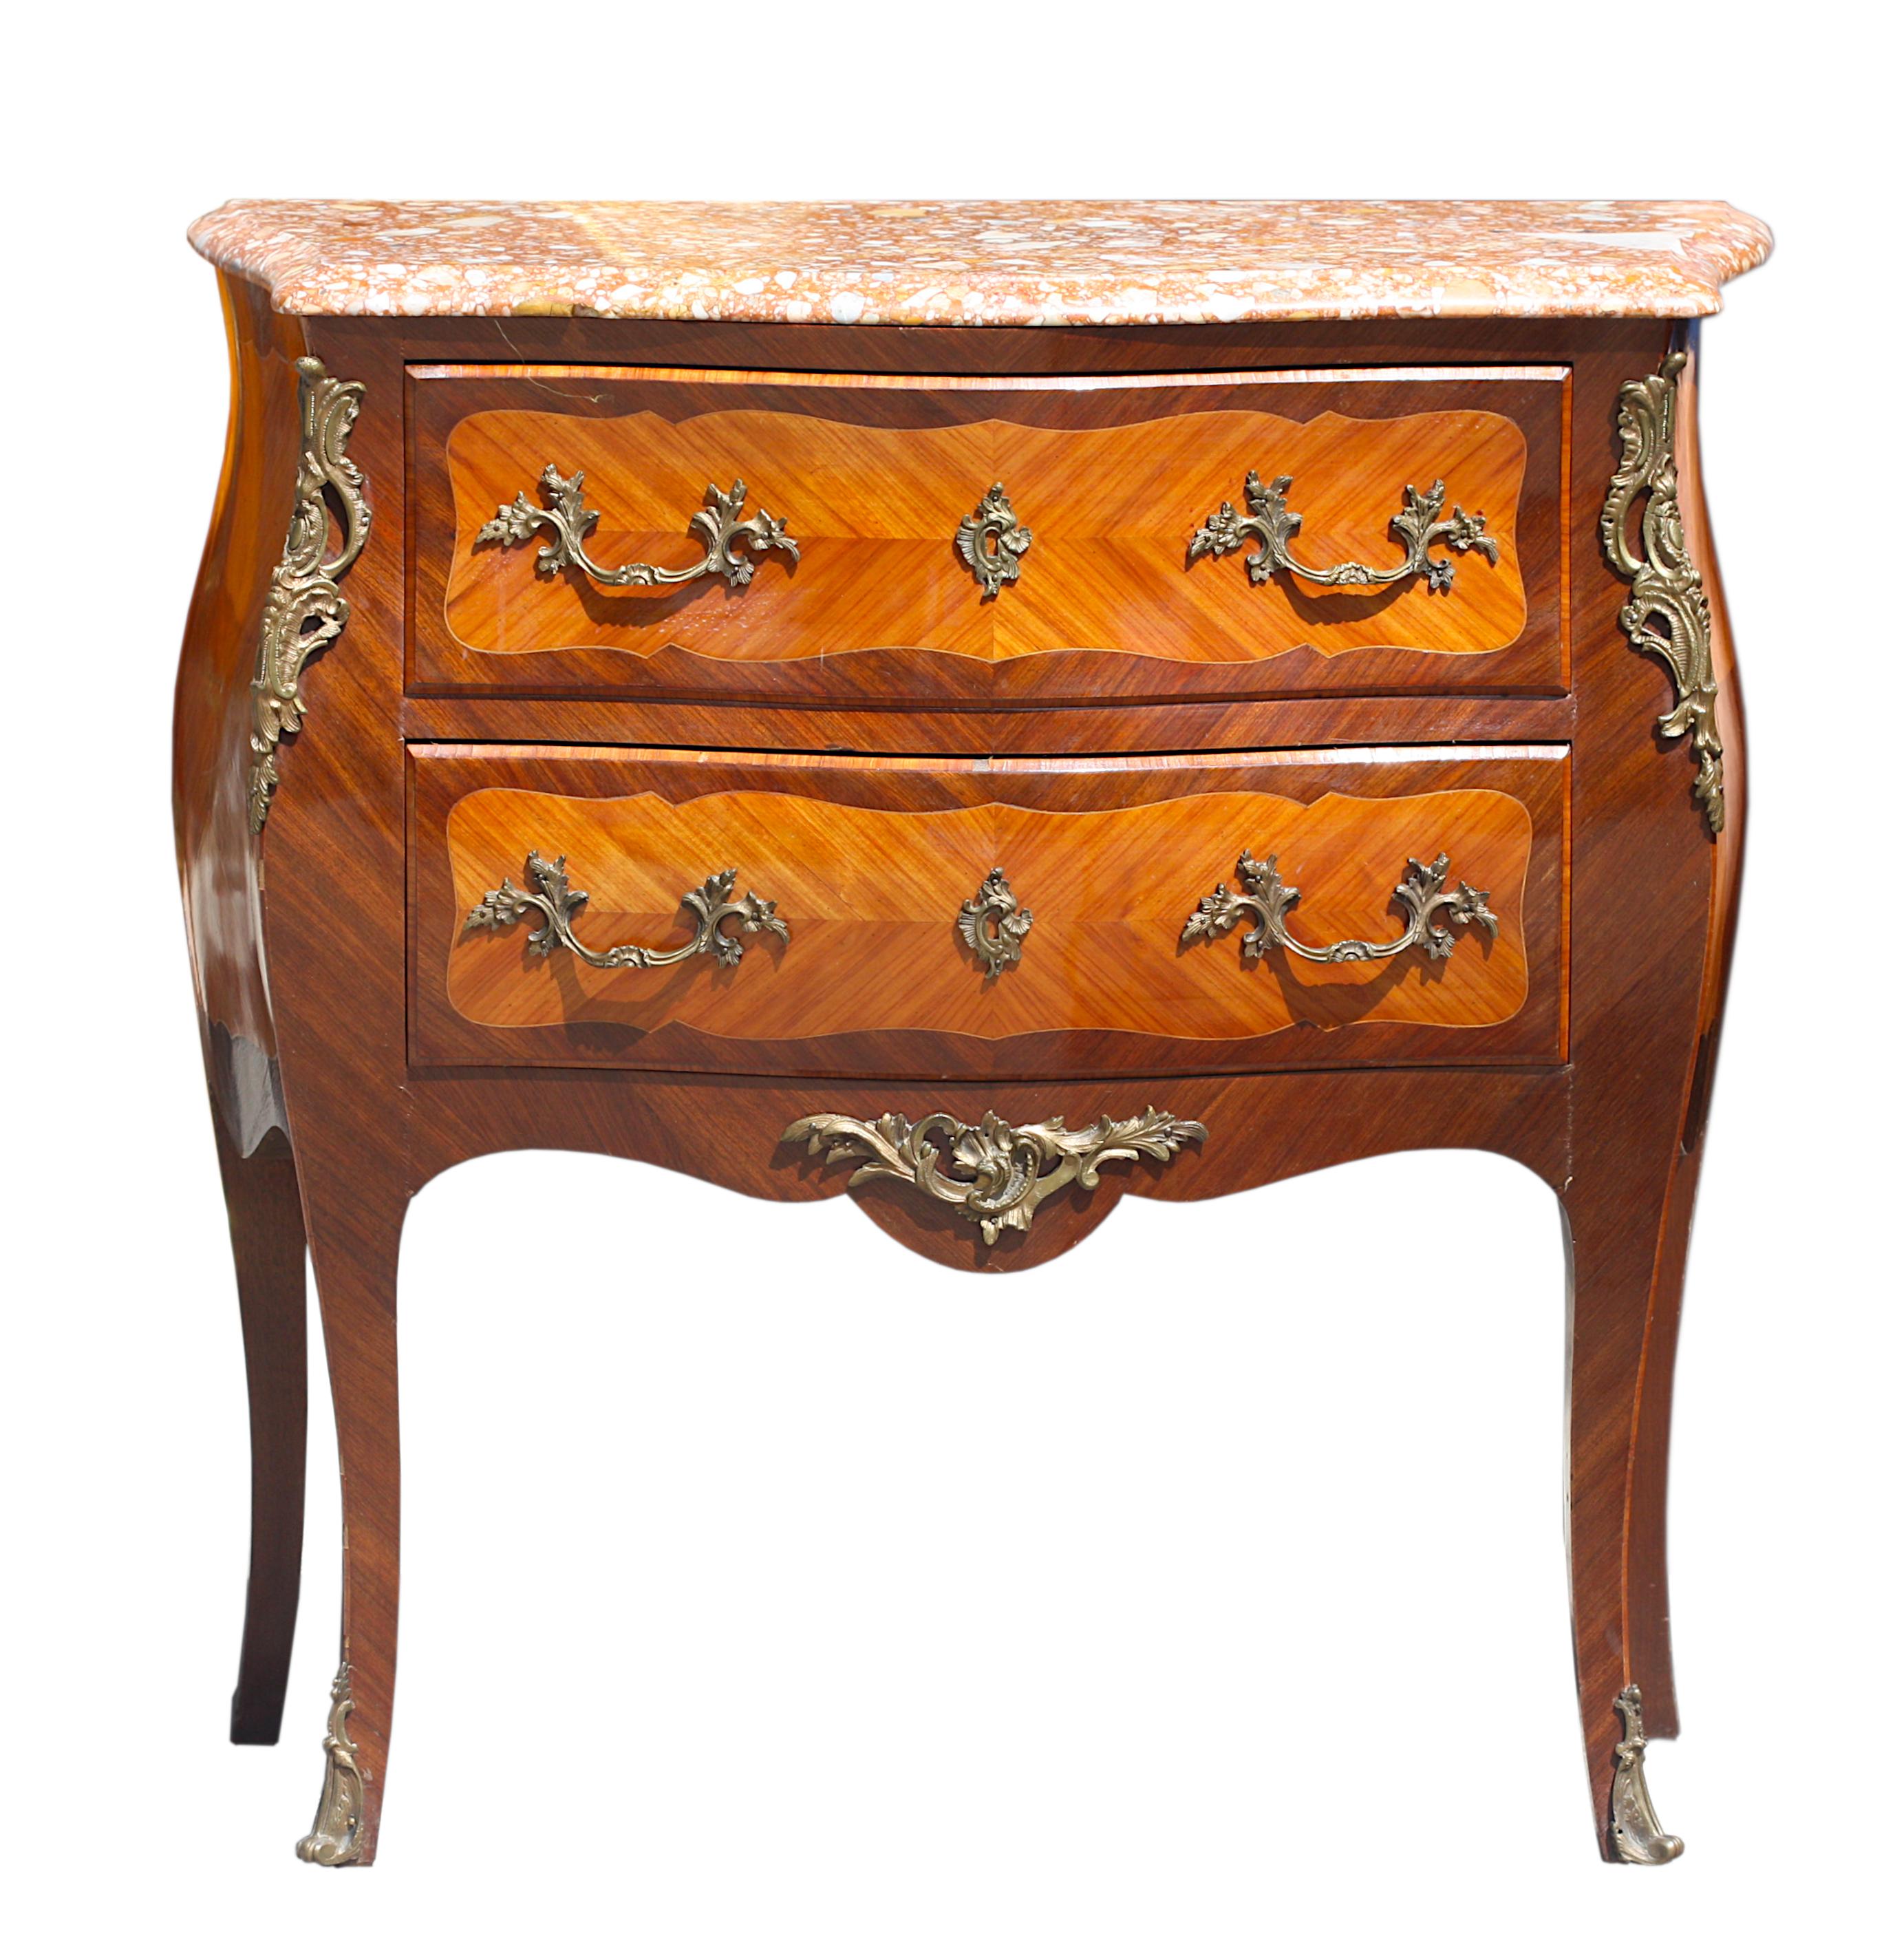 
Louis XV Style Gilt-Bronze Mtd. Marble Top Fruitwood Marquetry Commode
The breched aleop serpentine molded marble top above a conforming body fitted with two drawers, centering inlaid foliage, on cabriole legs. 
Height 32 in. (81.28 cm.), Width